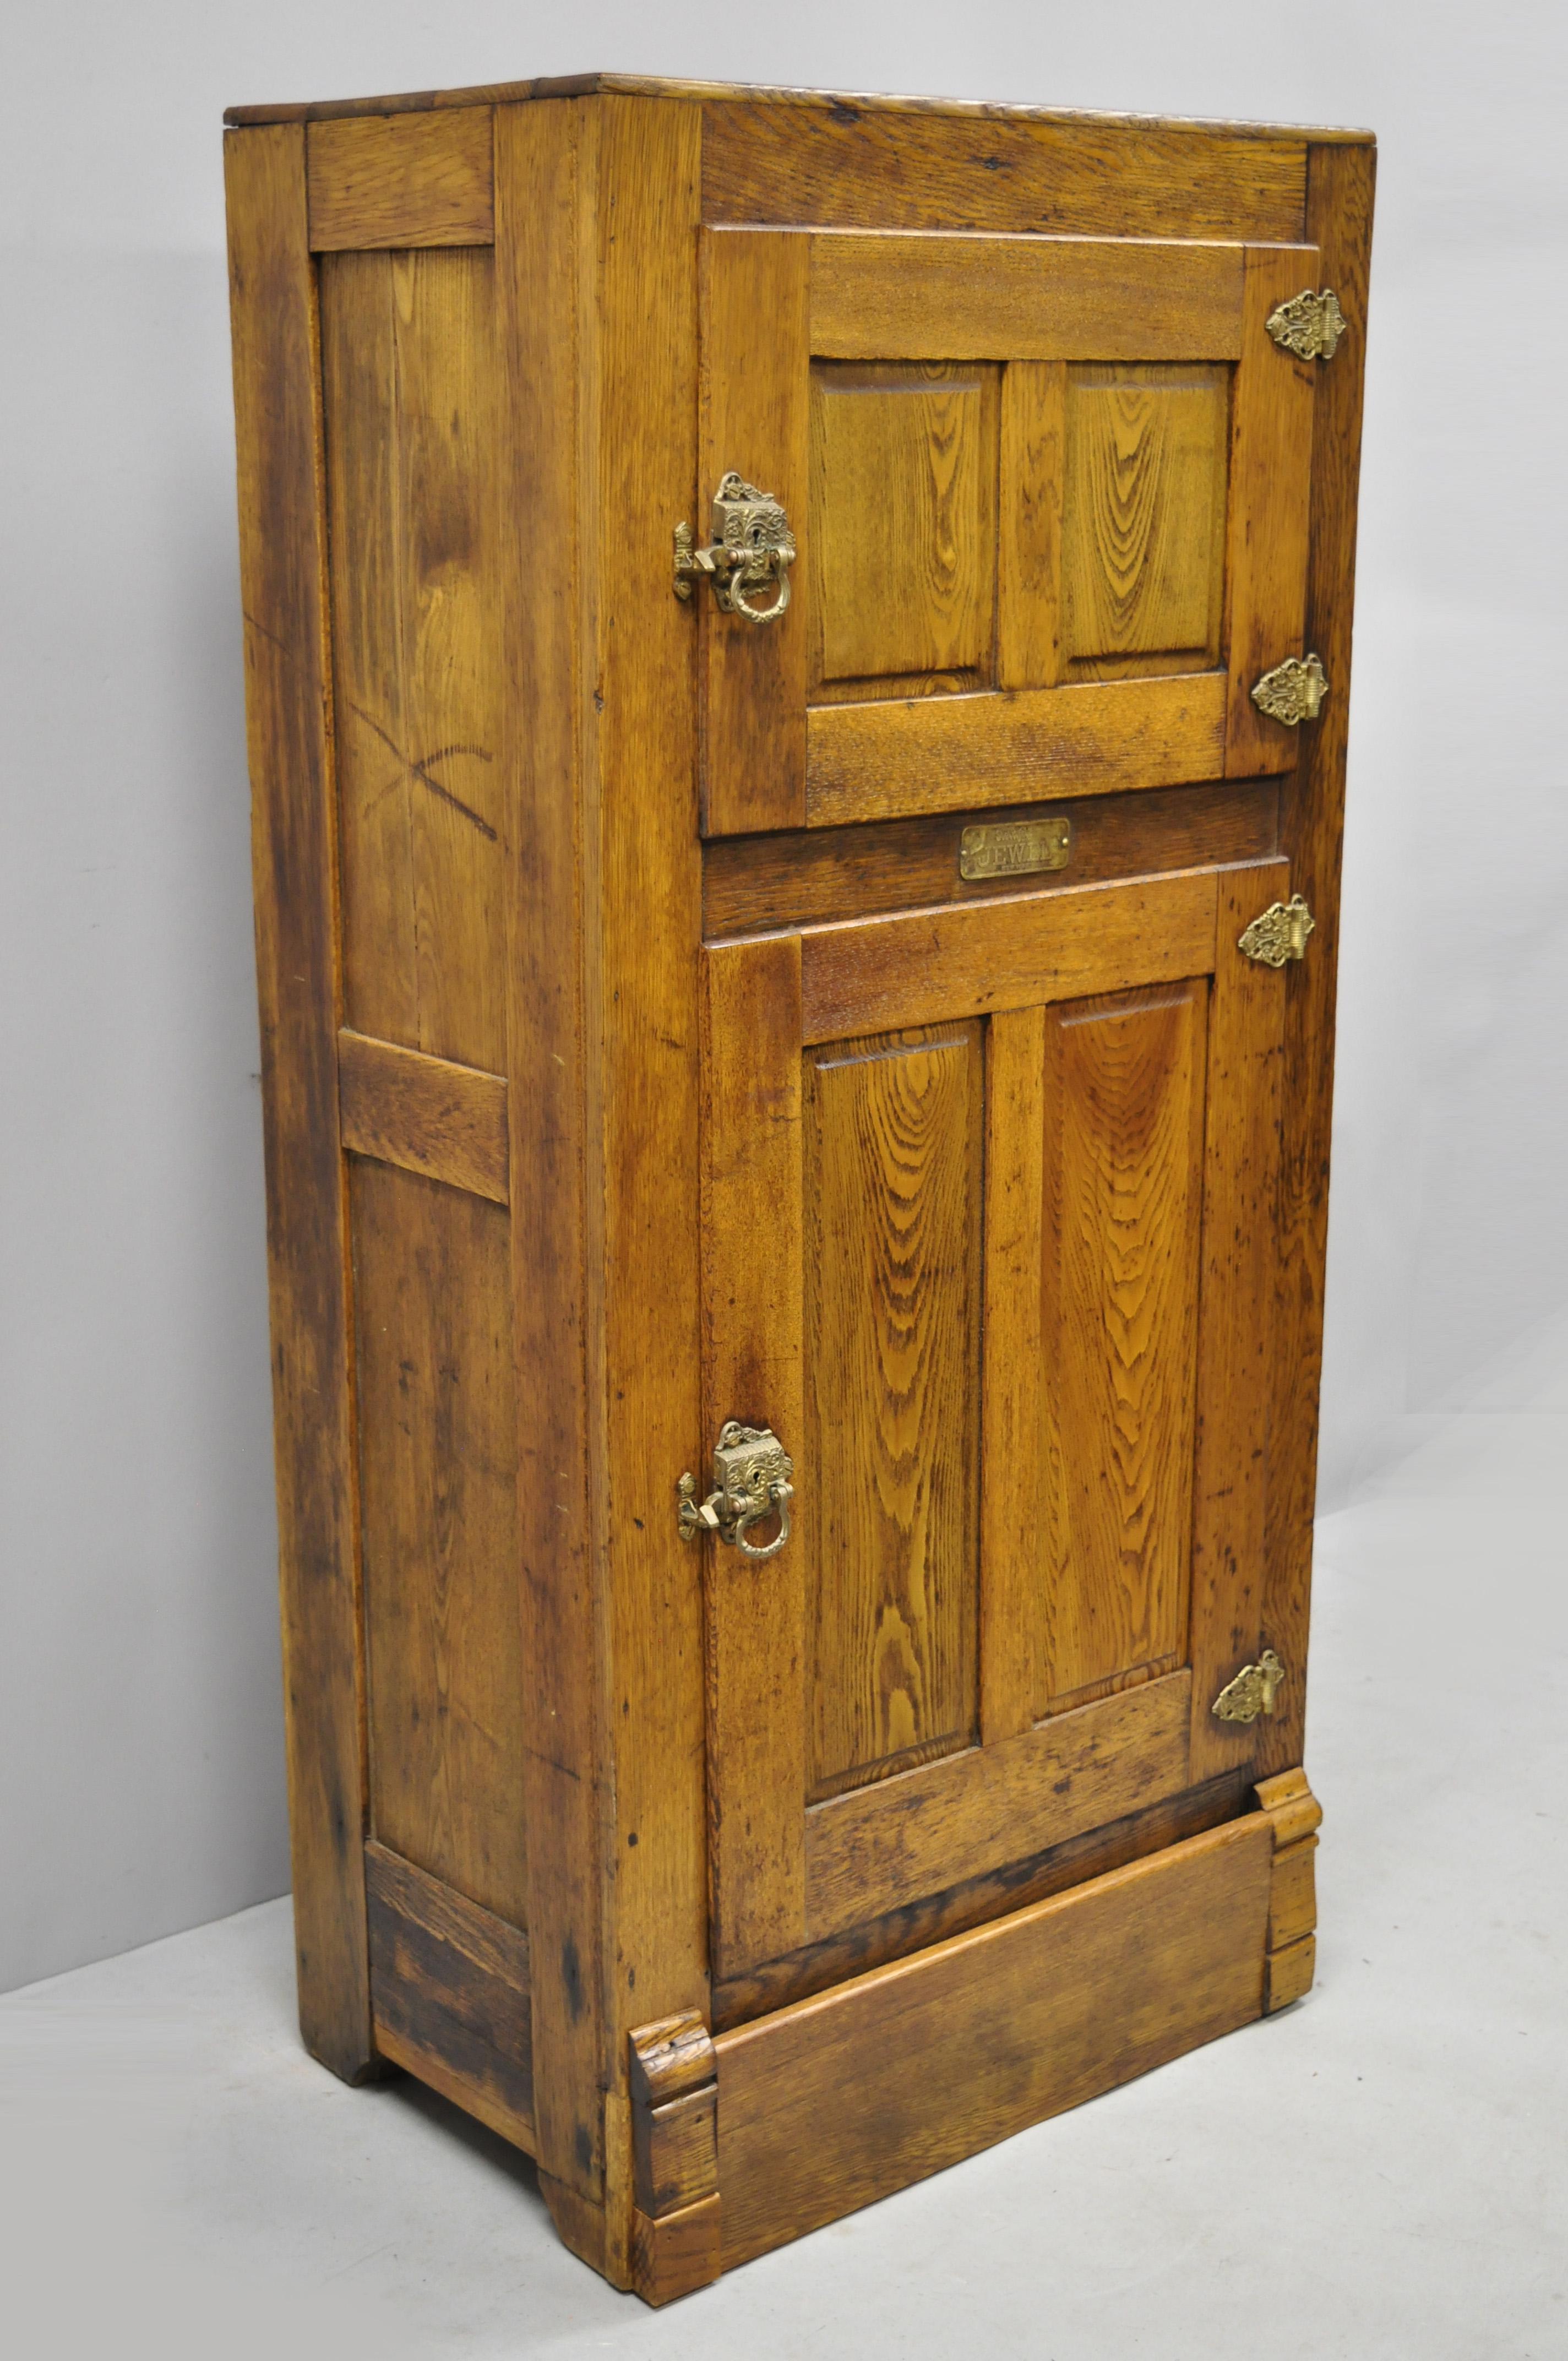 Antique 19th century oakwood two-door ice box freezer by Steinfeld Jewel. Item features 2 swing doors, solid wood construction, beautiful wood grain, original metal tag, solid brass hardware, quality American craftsmanship, circa late 19th century.